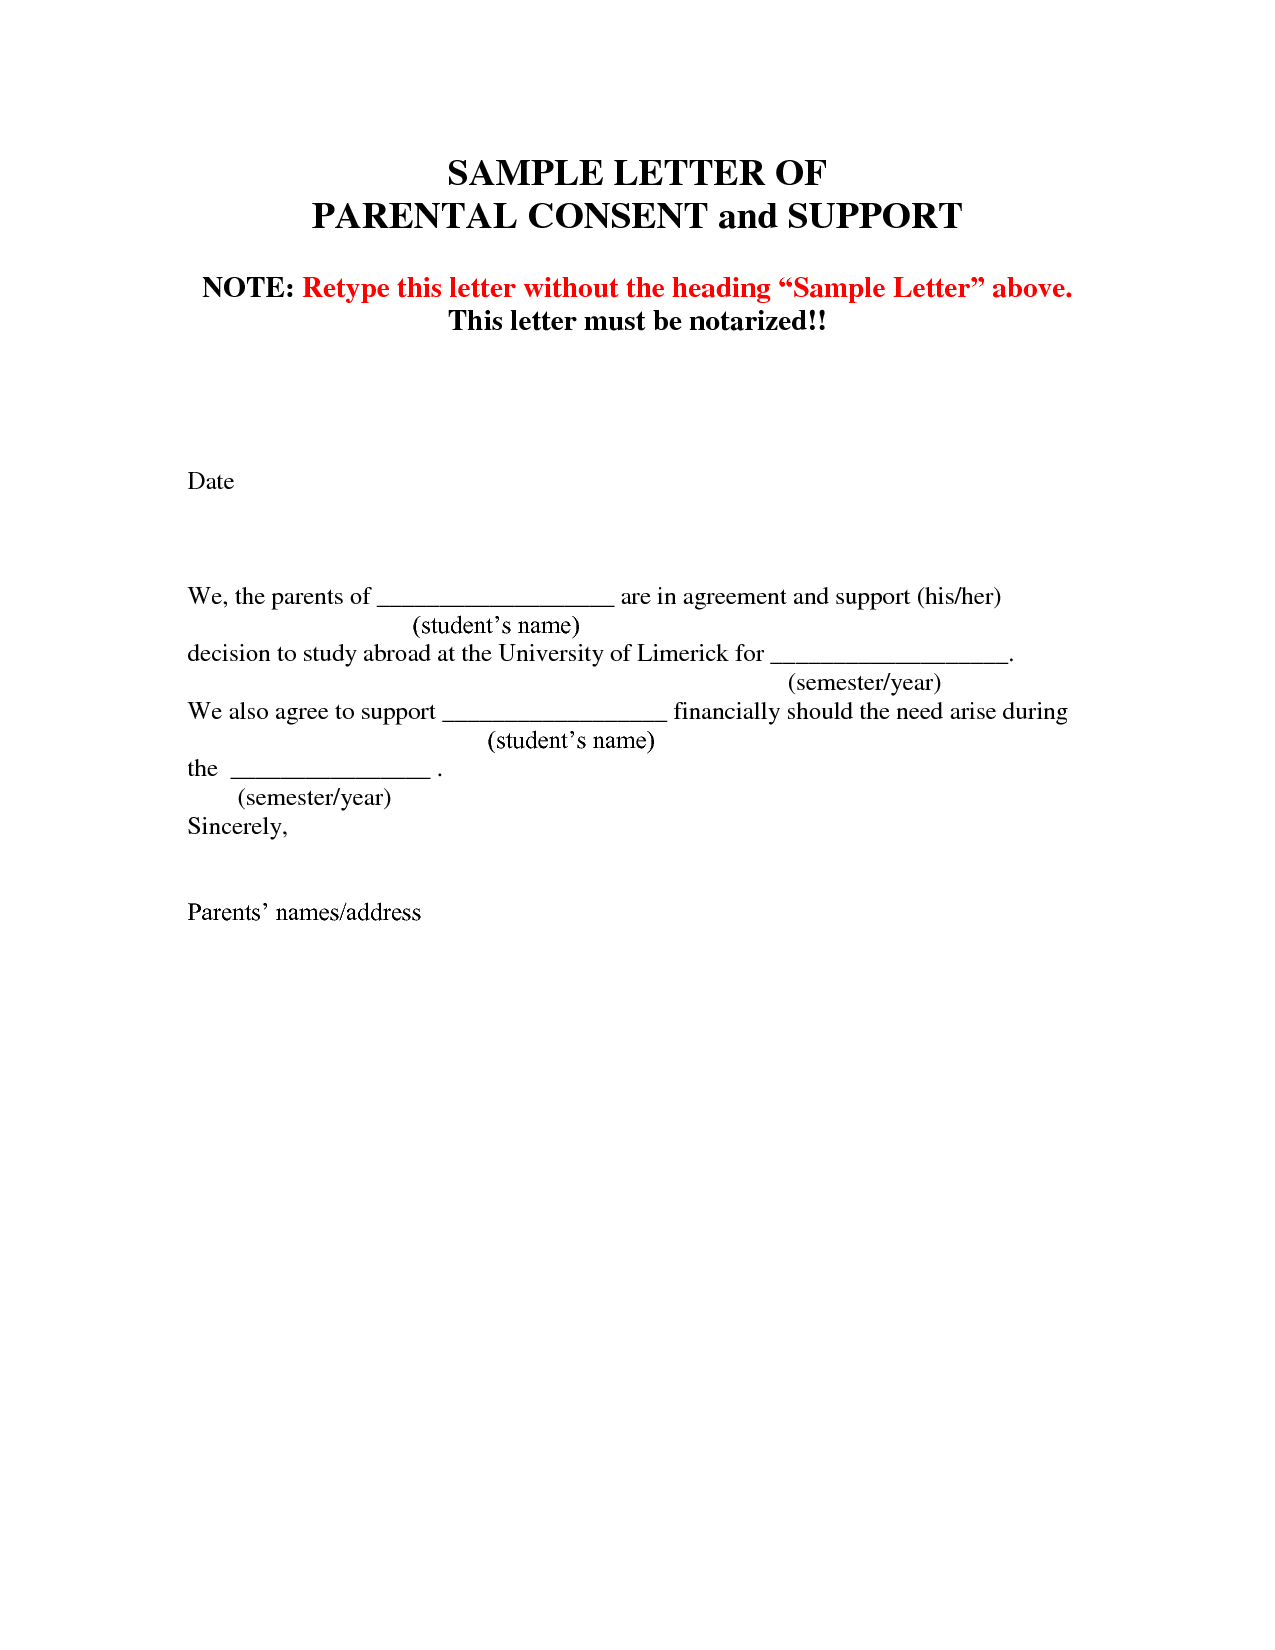 Parental Consent Permission Letter Template - Letter Consent Template Travel Sample Authorization Samples and